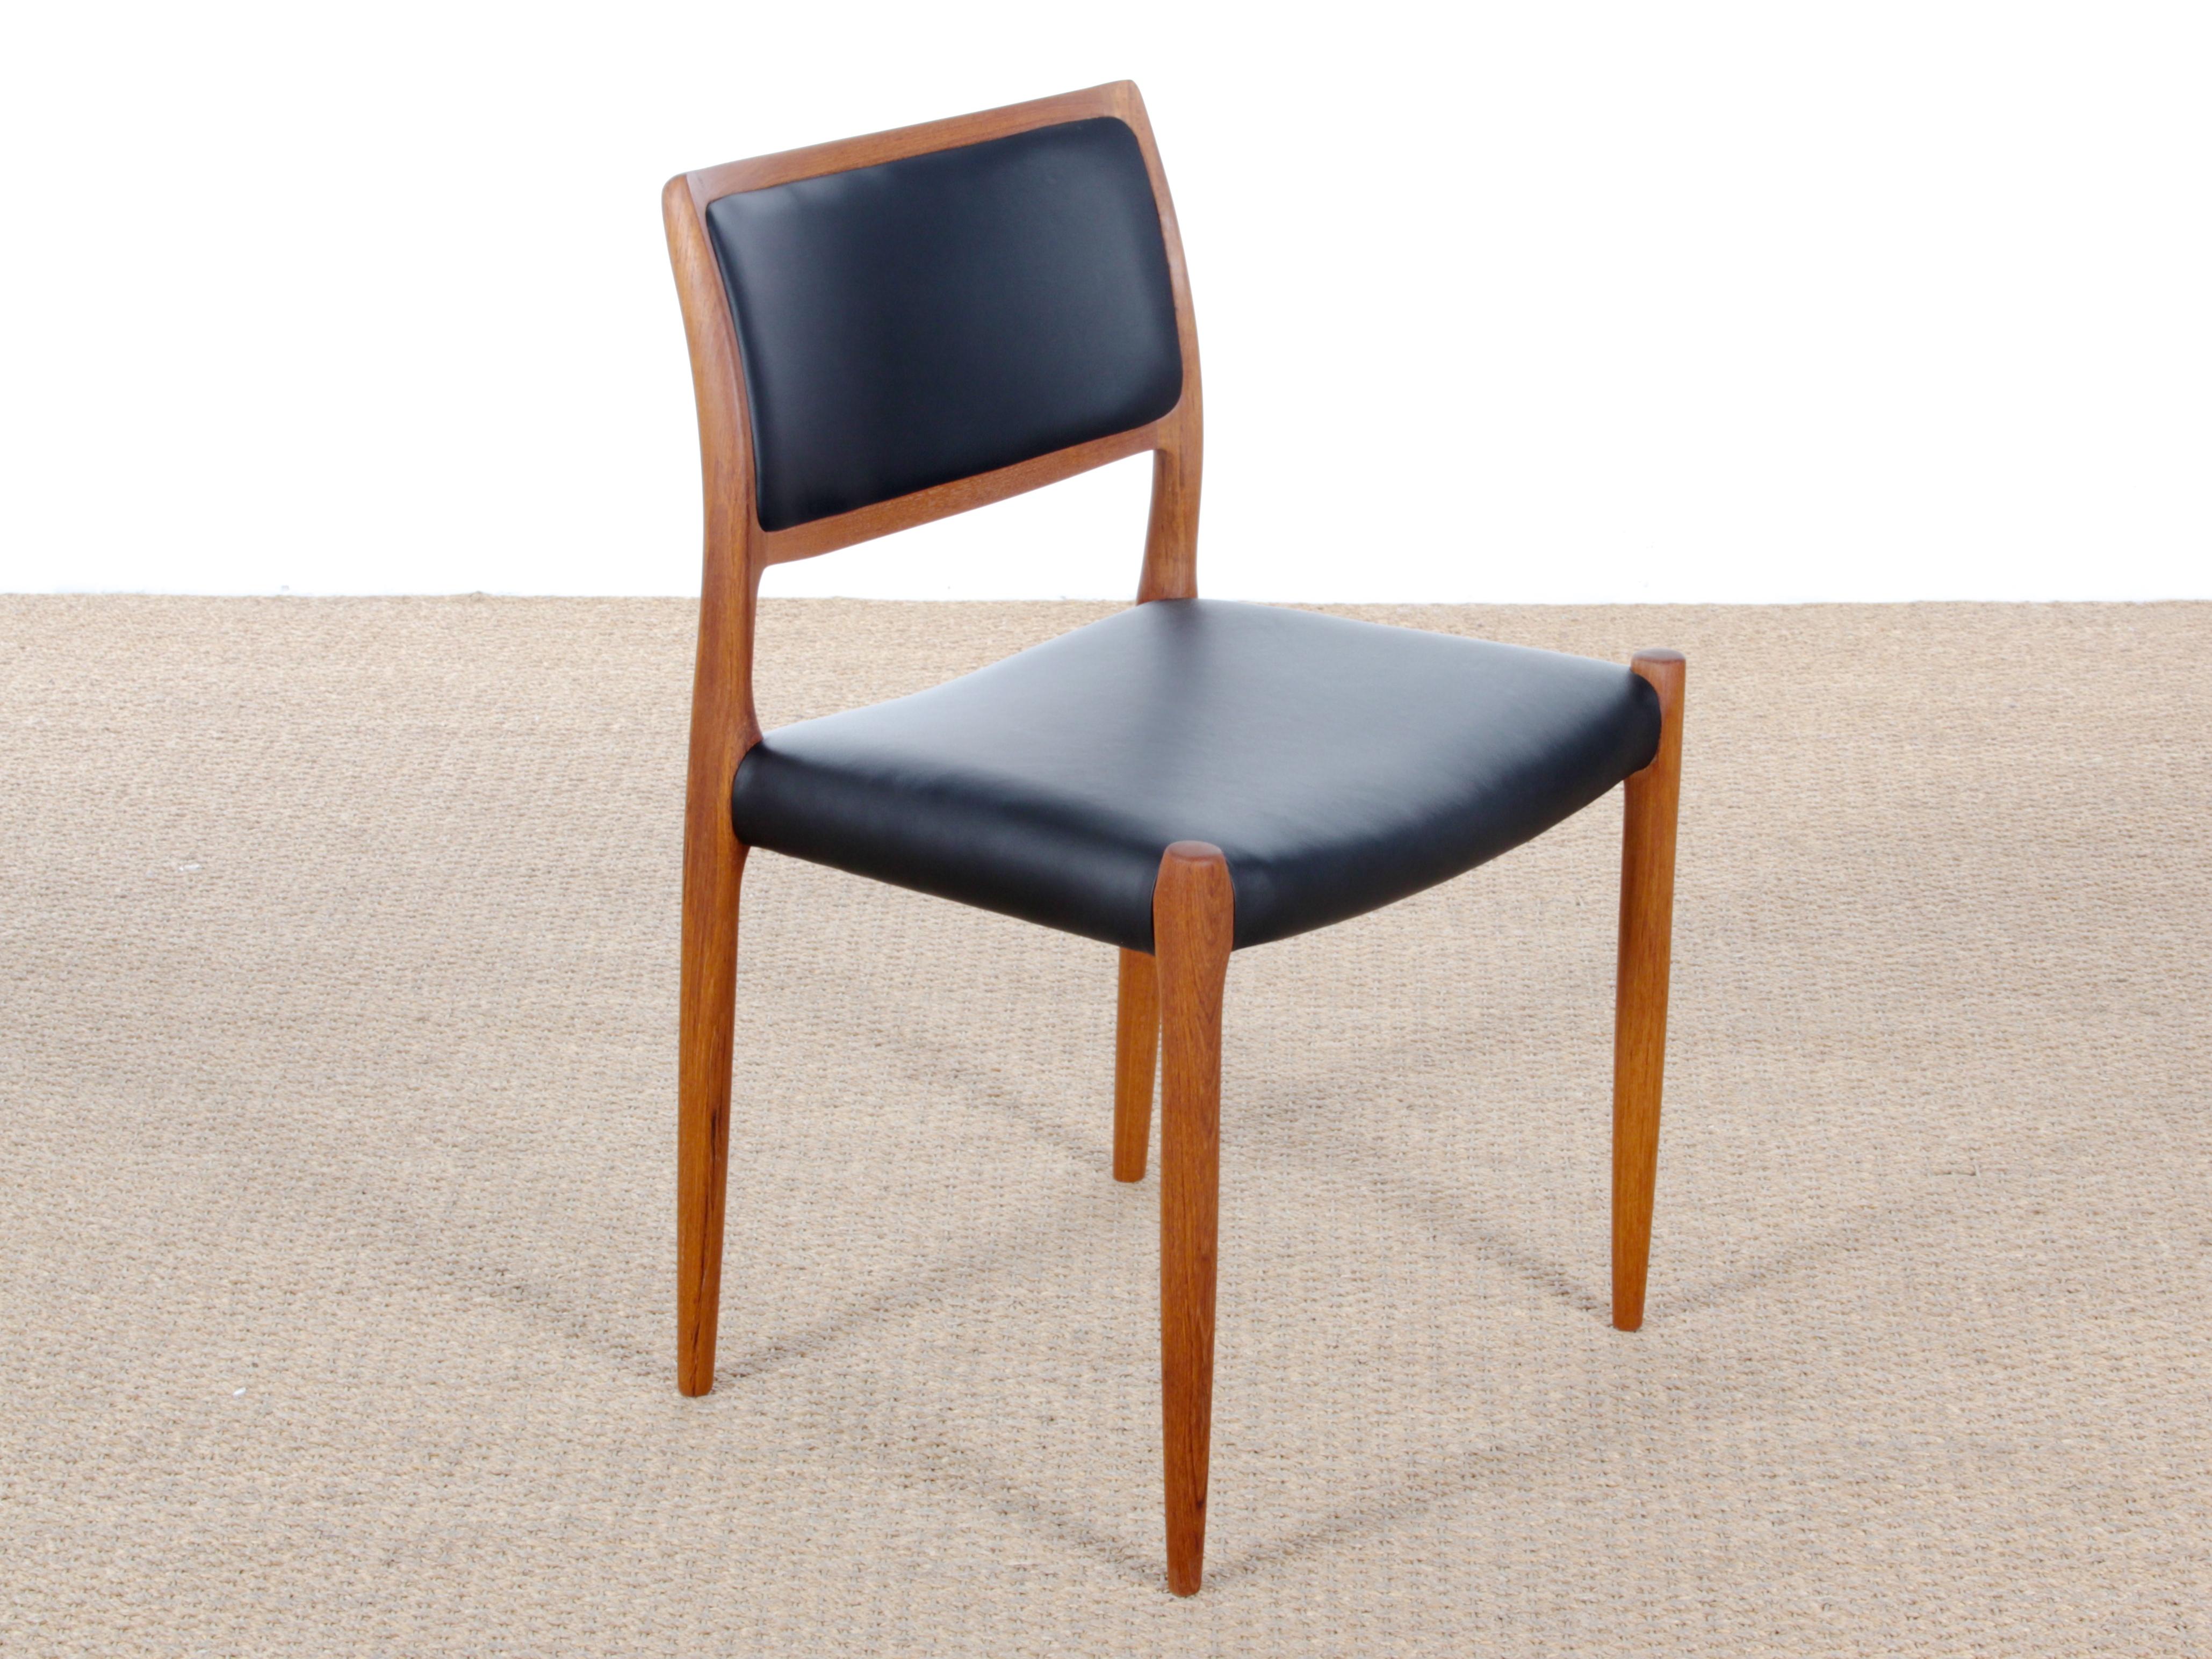 Mid-20th Century Mid-Century Modern Danish Chair Model 80 by Niels Møller, New Edition For Sale